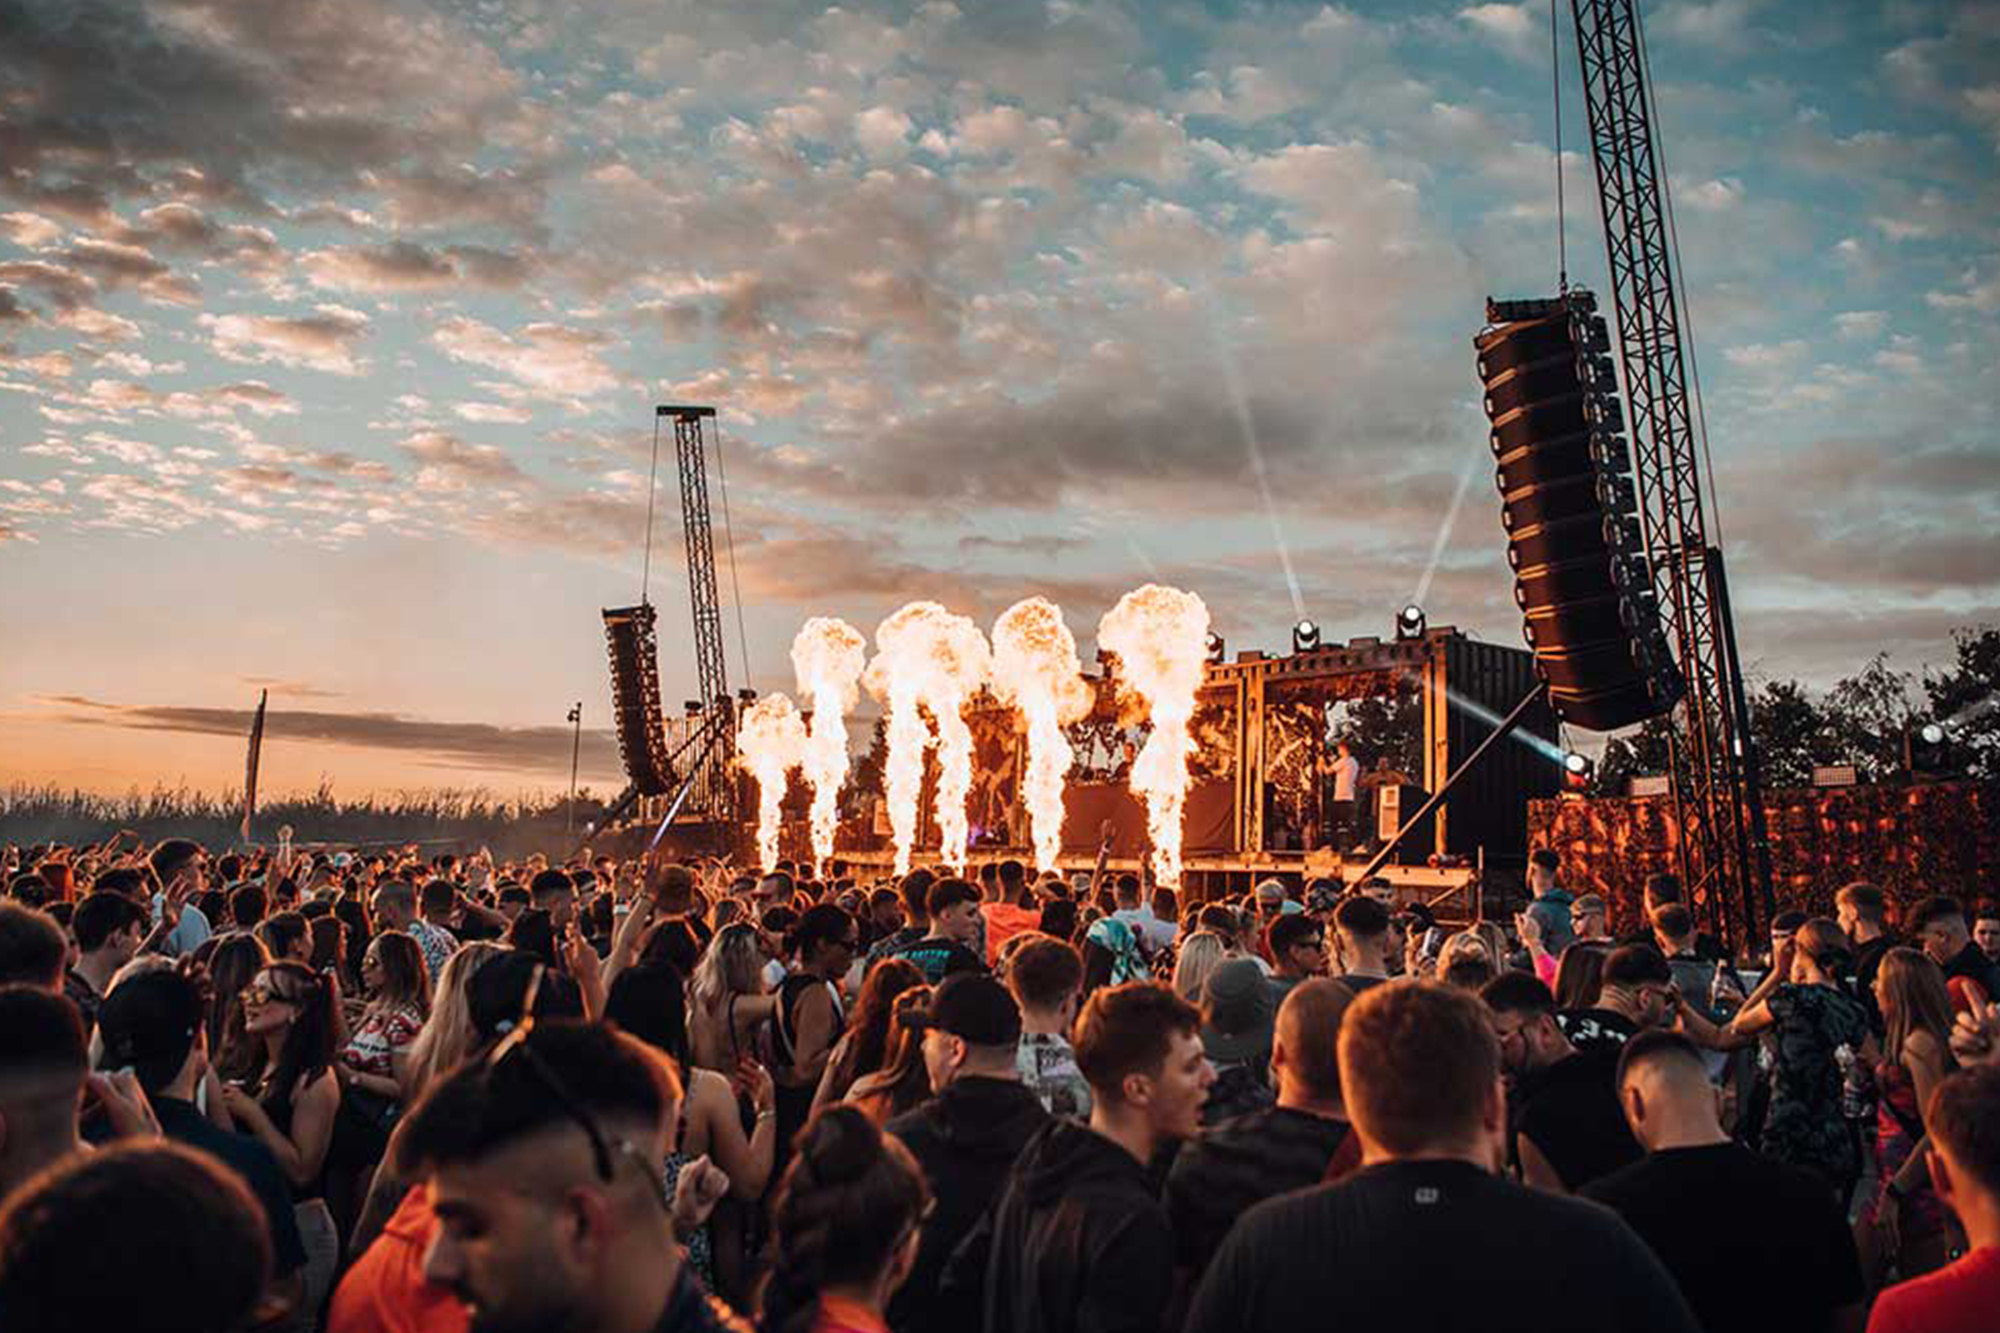 the stage at sunset